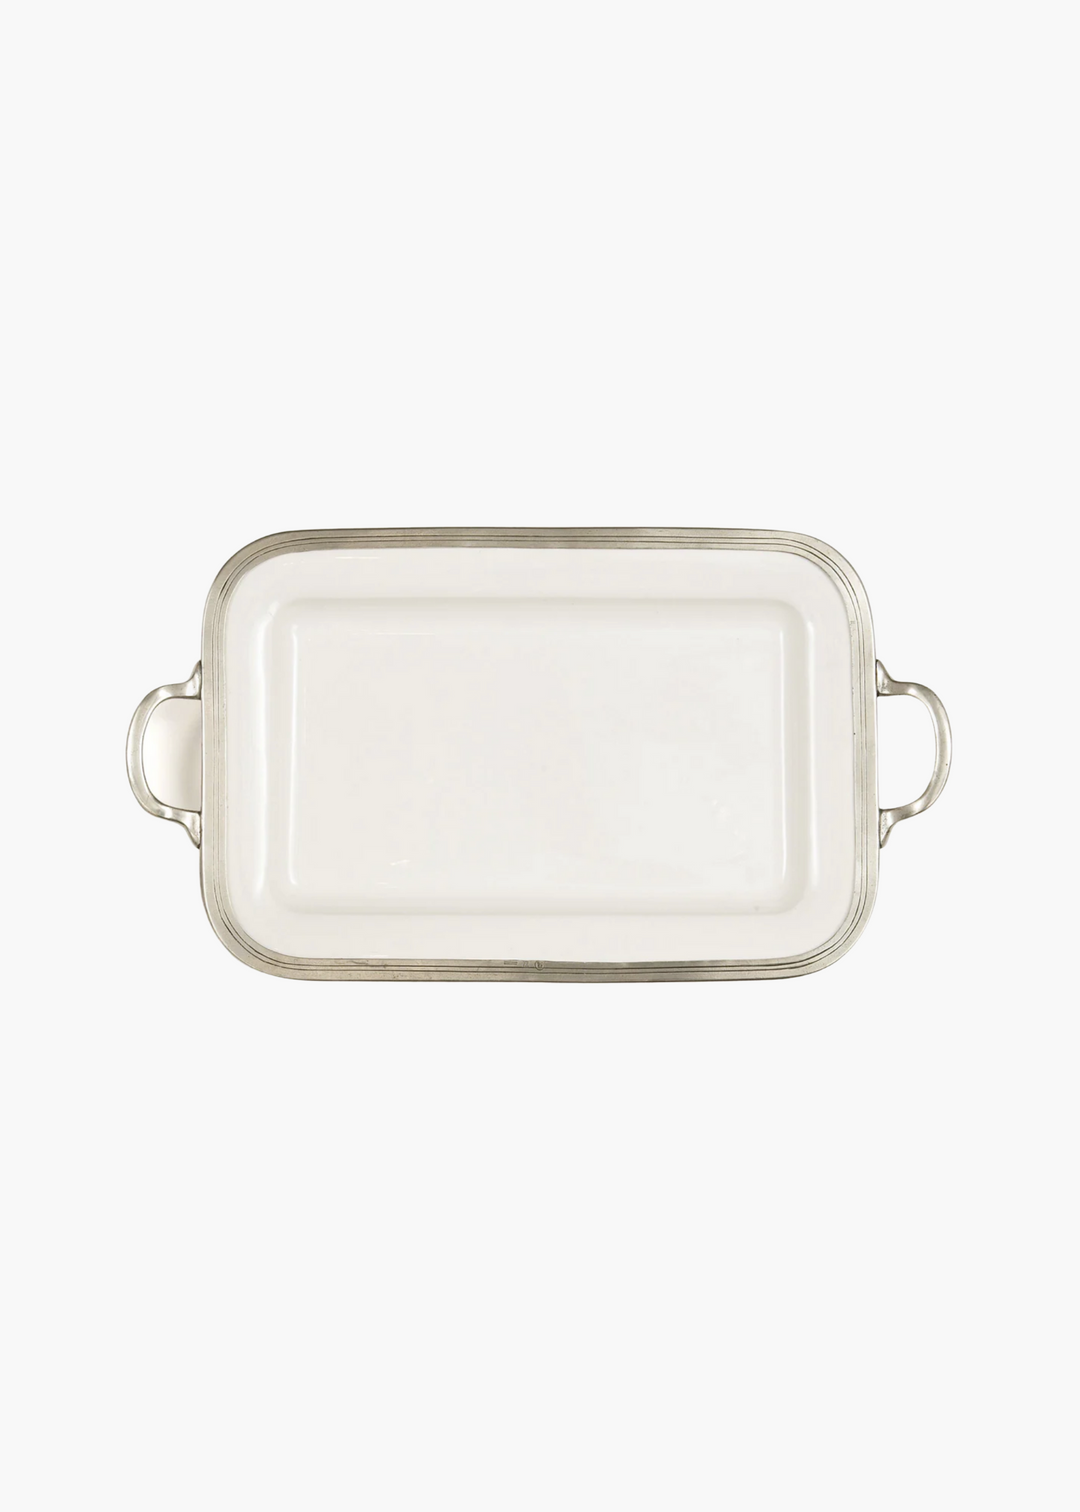 Tuscan Rectangle Tray with Handles